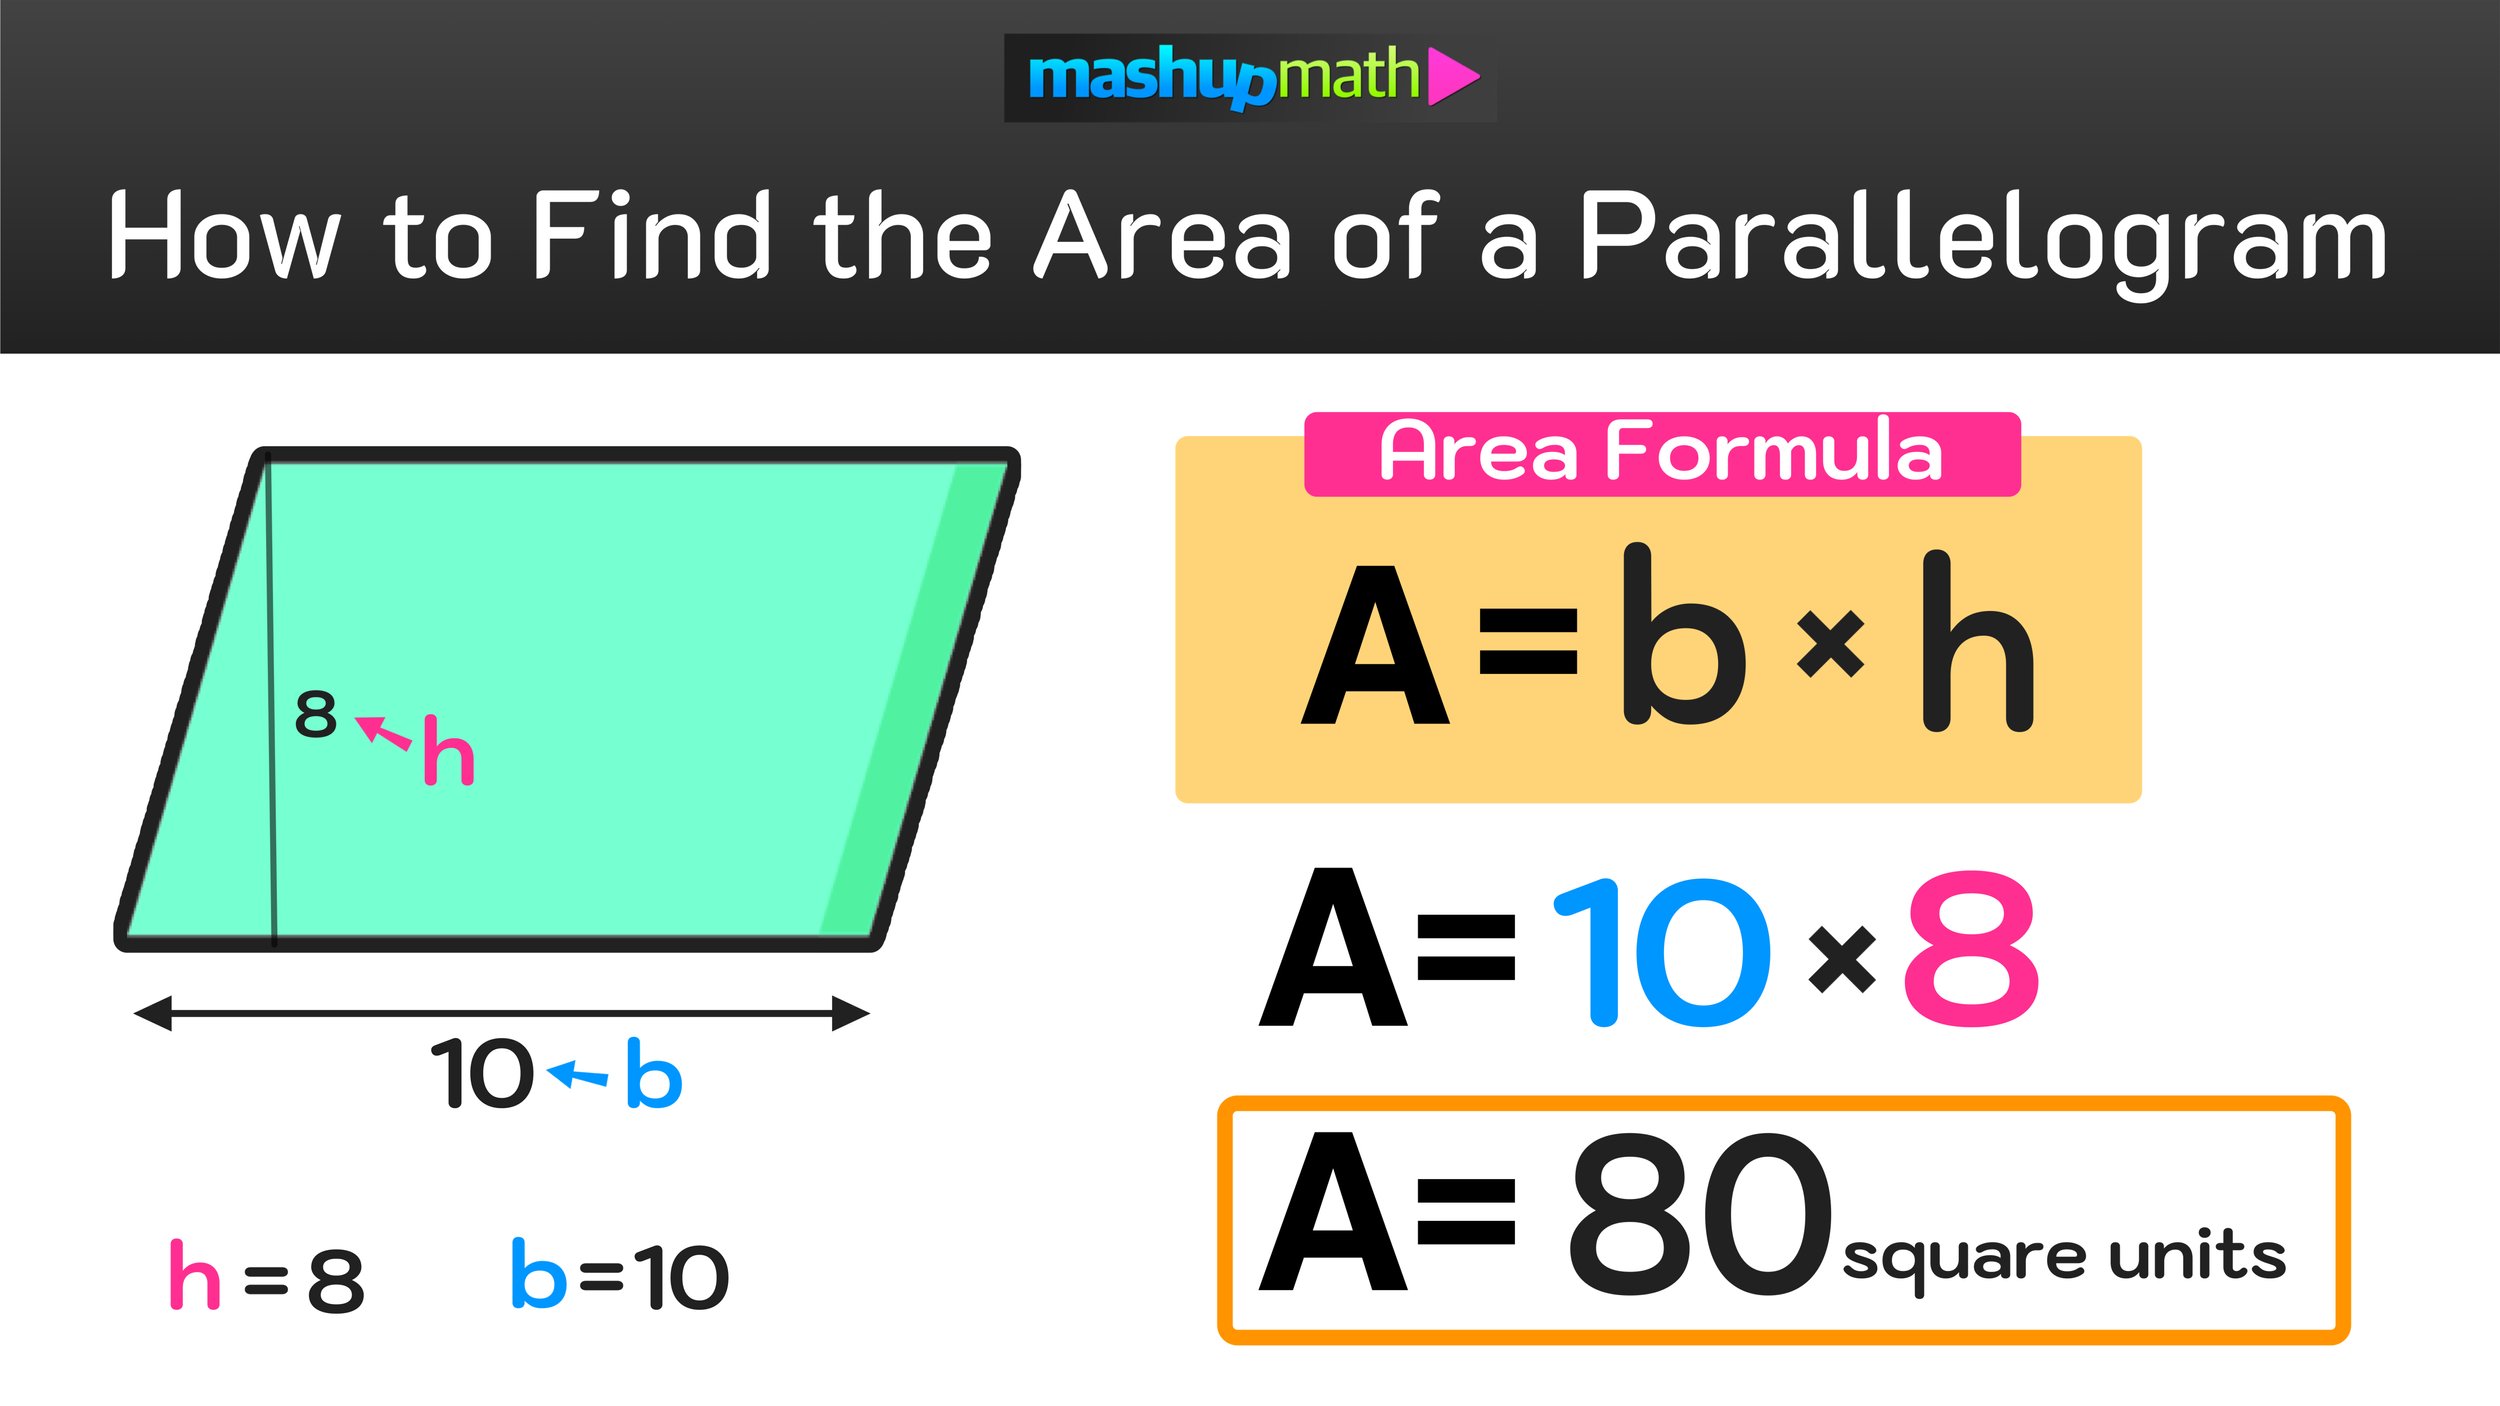 how-to-find-the-area-of-a-parallelogram-in-3-easy-steps-mashup-math